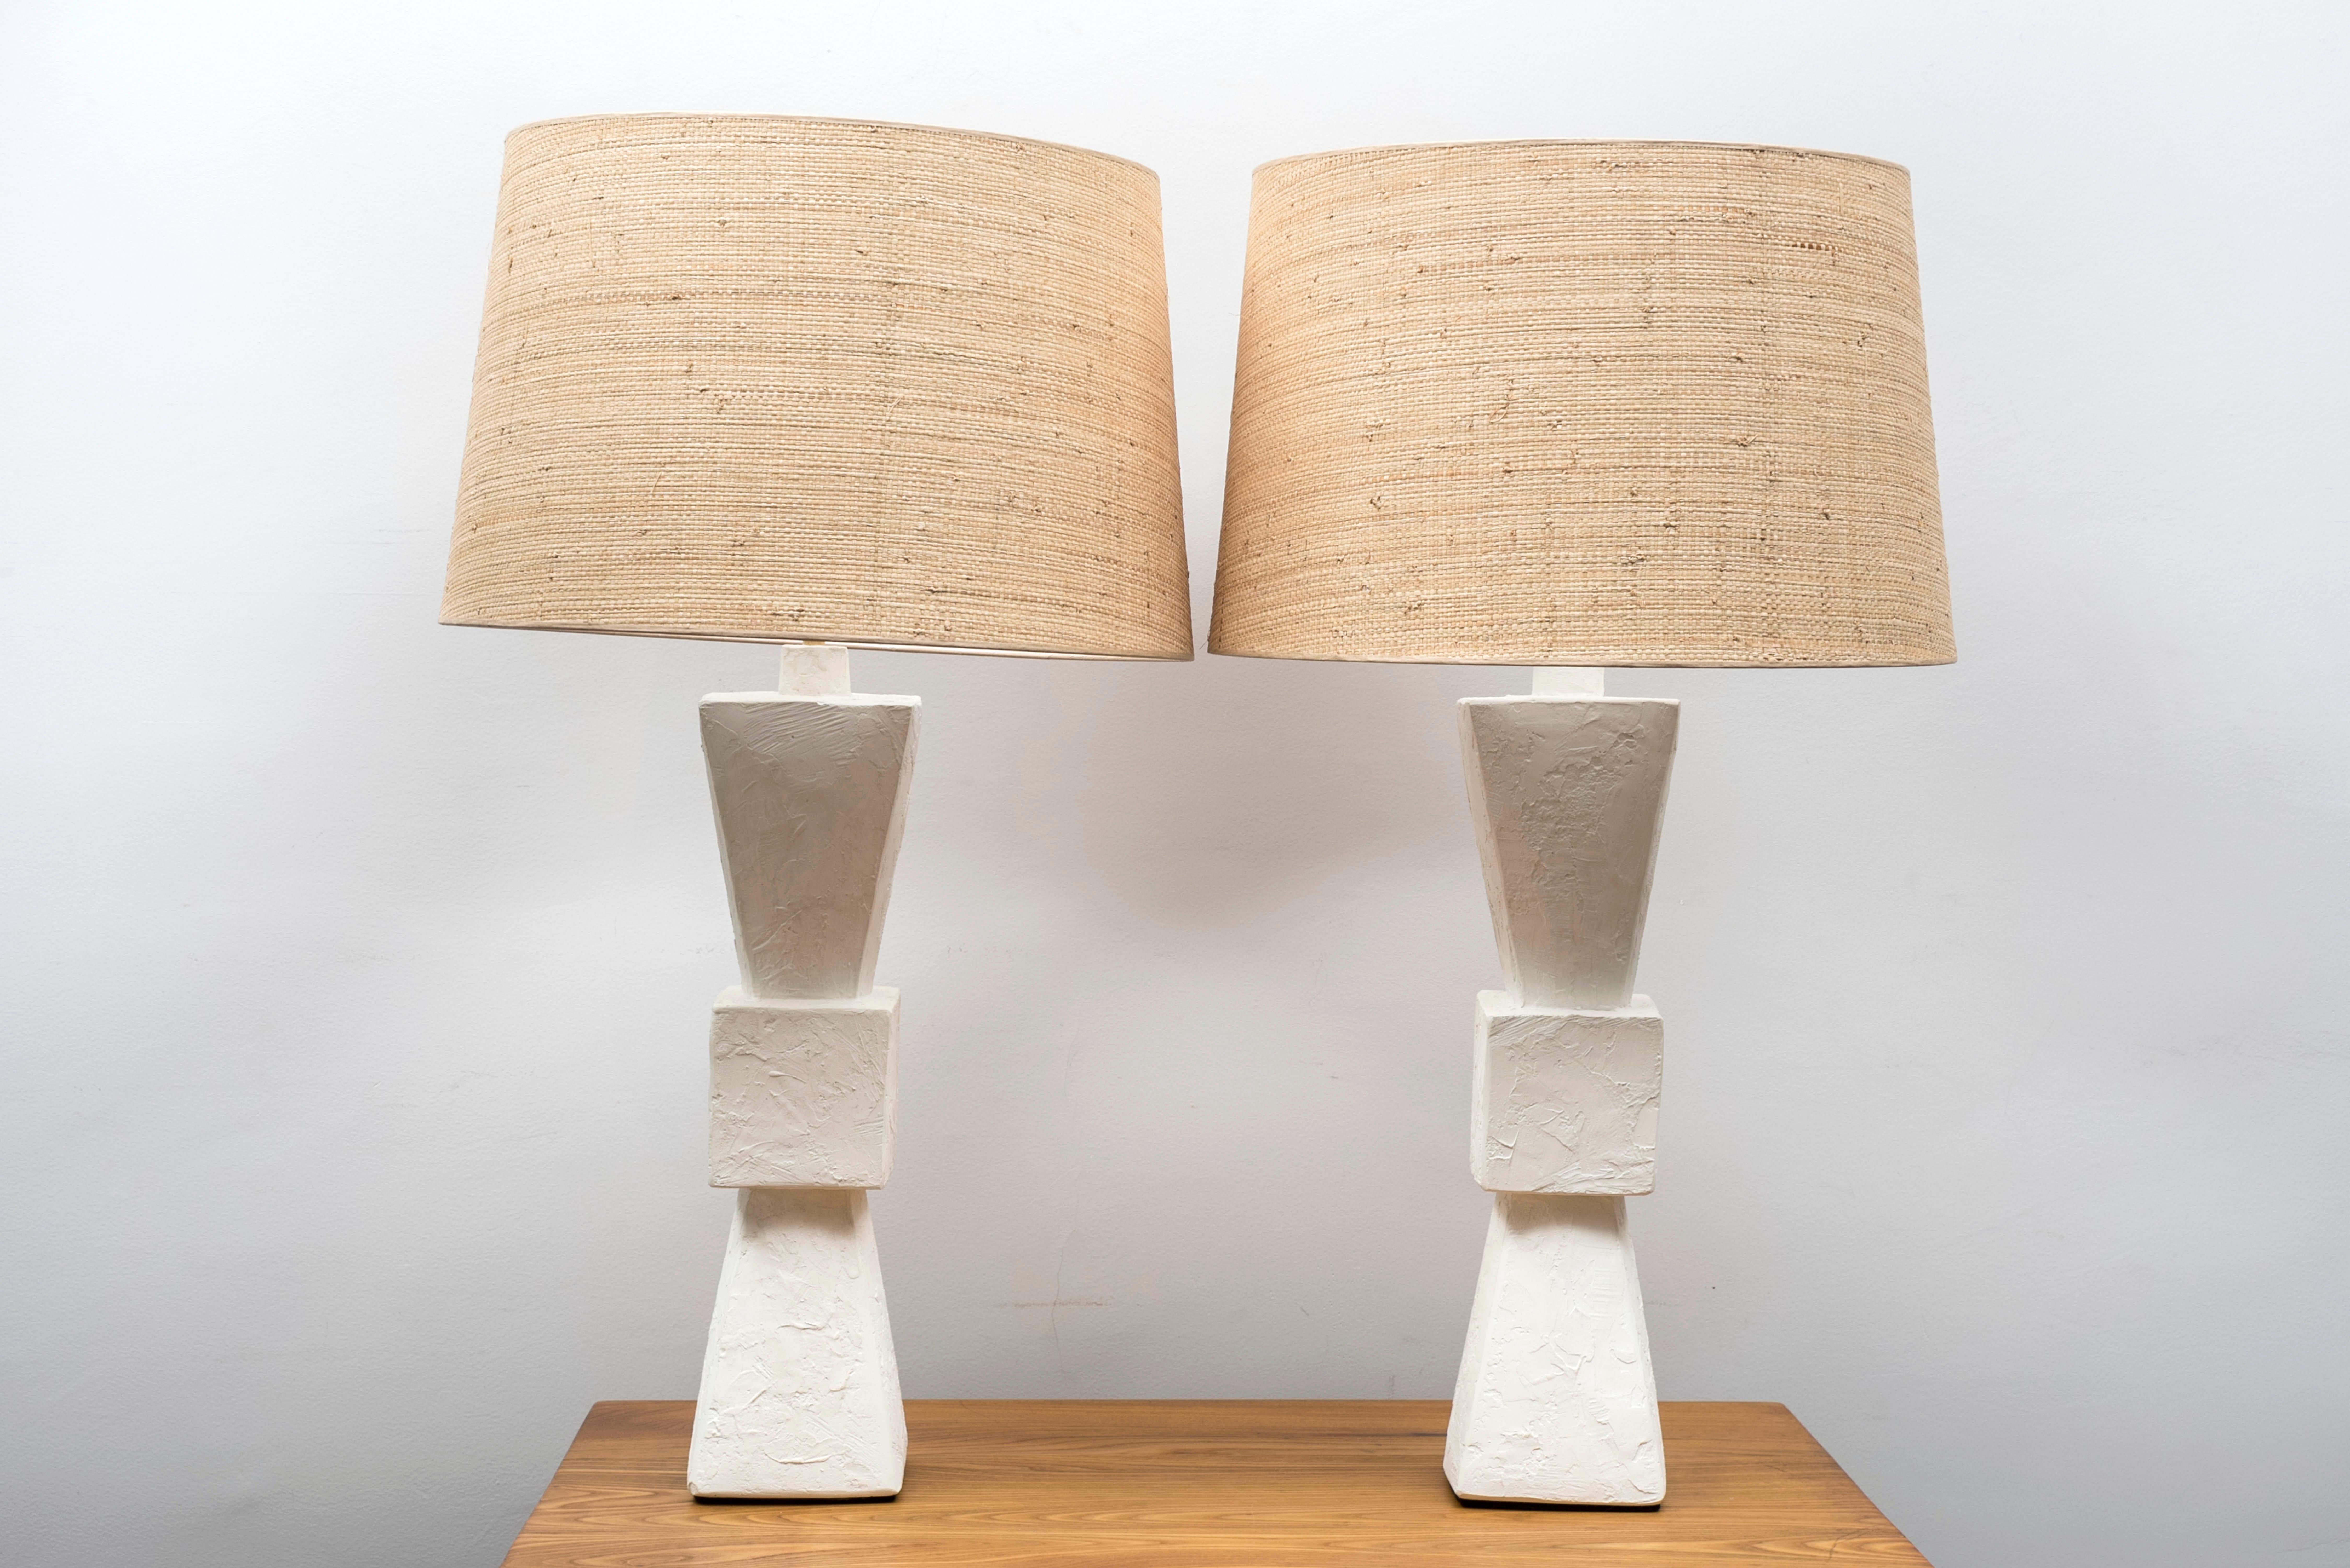 Pair of plaster lamps, baluster shape.
With custom made shades in vegetal fiber.
France, contemporary creation

Measures: Total height 81 cm - 31.9 inches
Plaster base height (including collar) 52 cm - 20.5 inches
Diameter (shade) 47 cm - 18.5